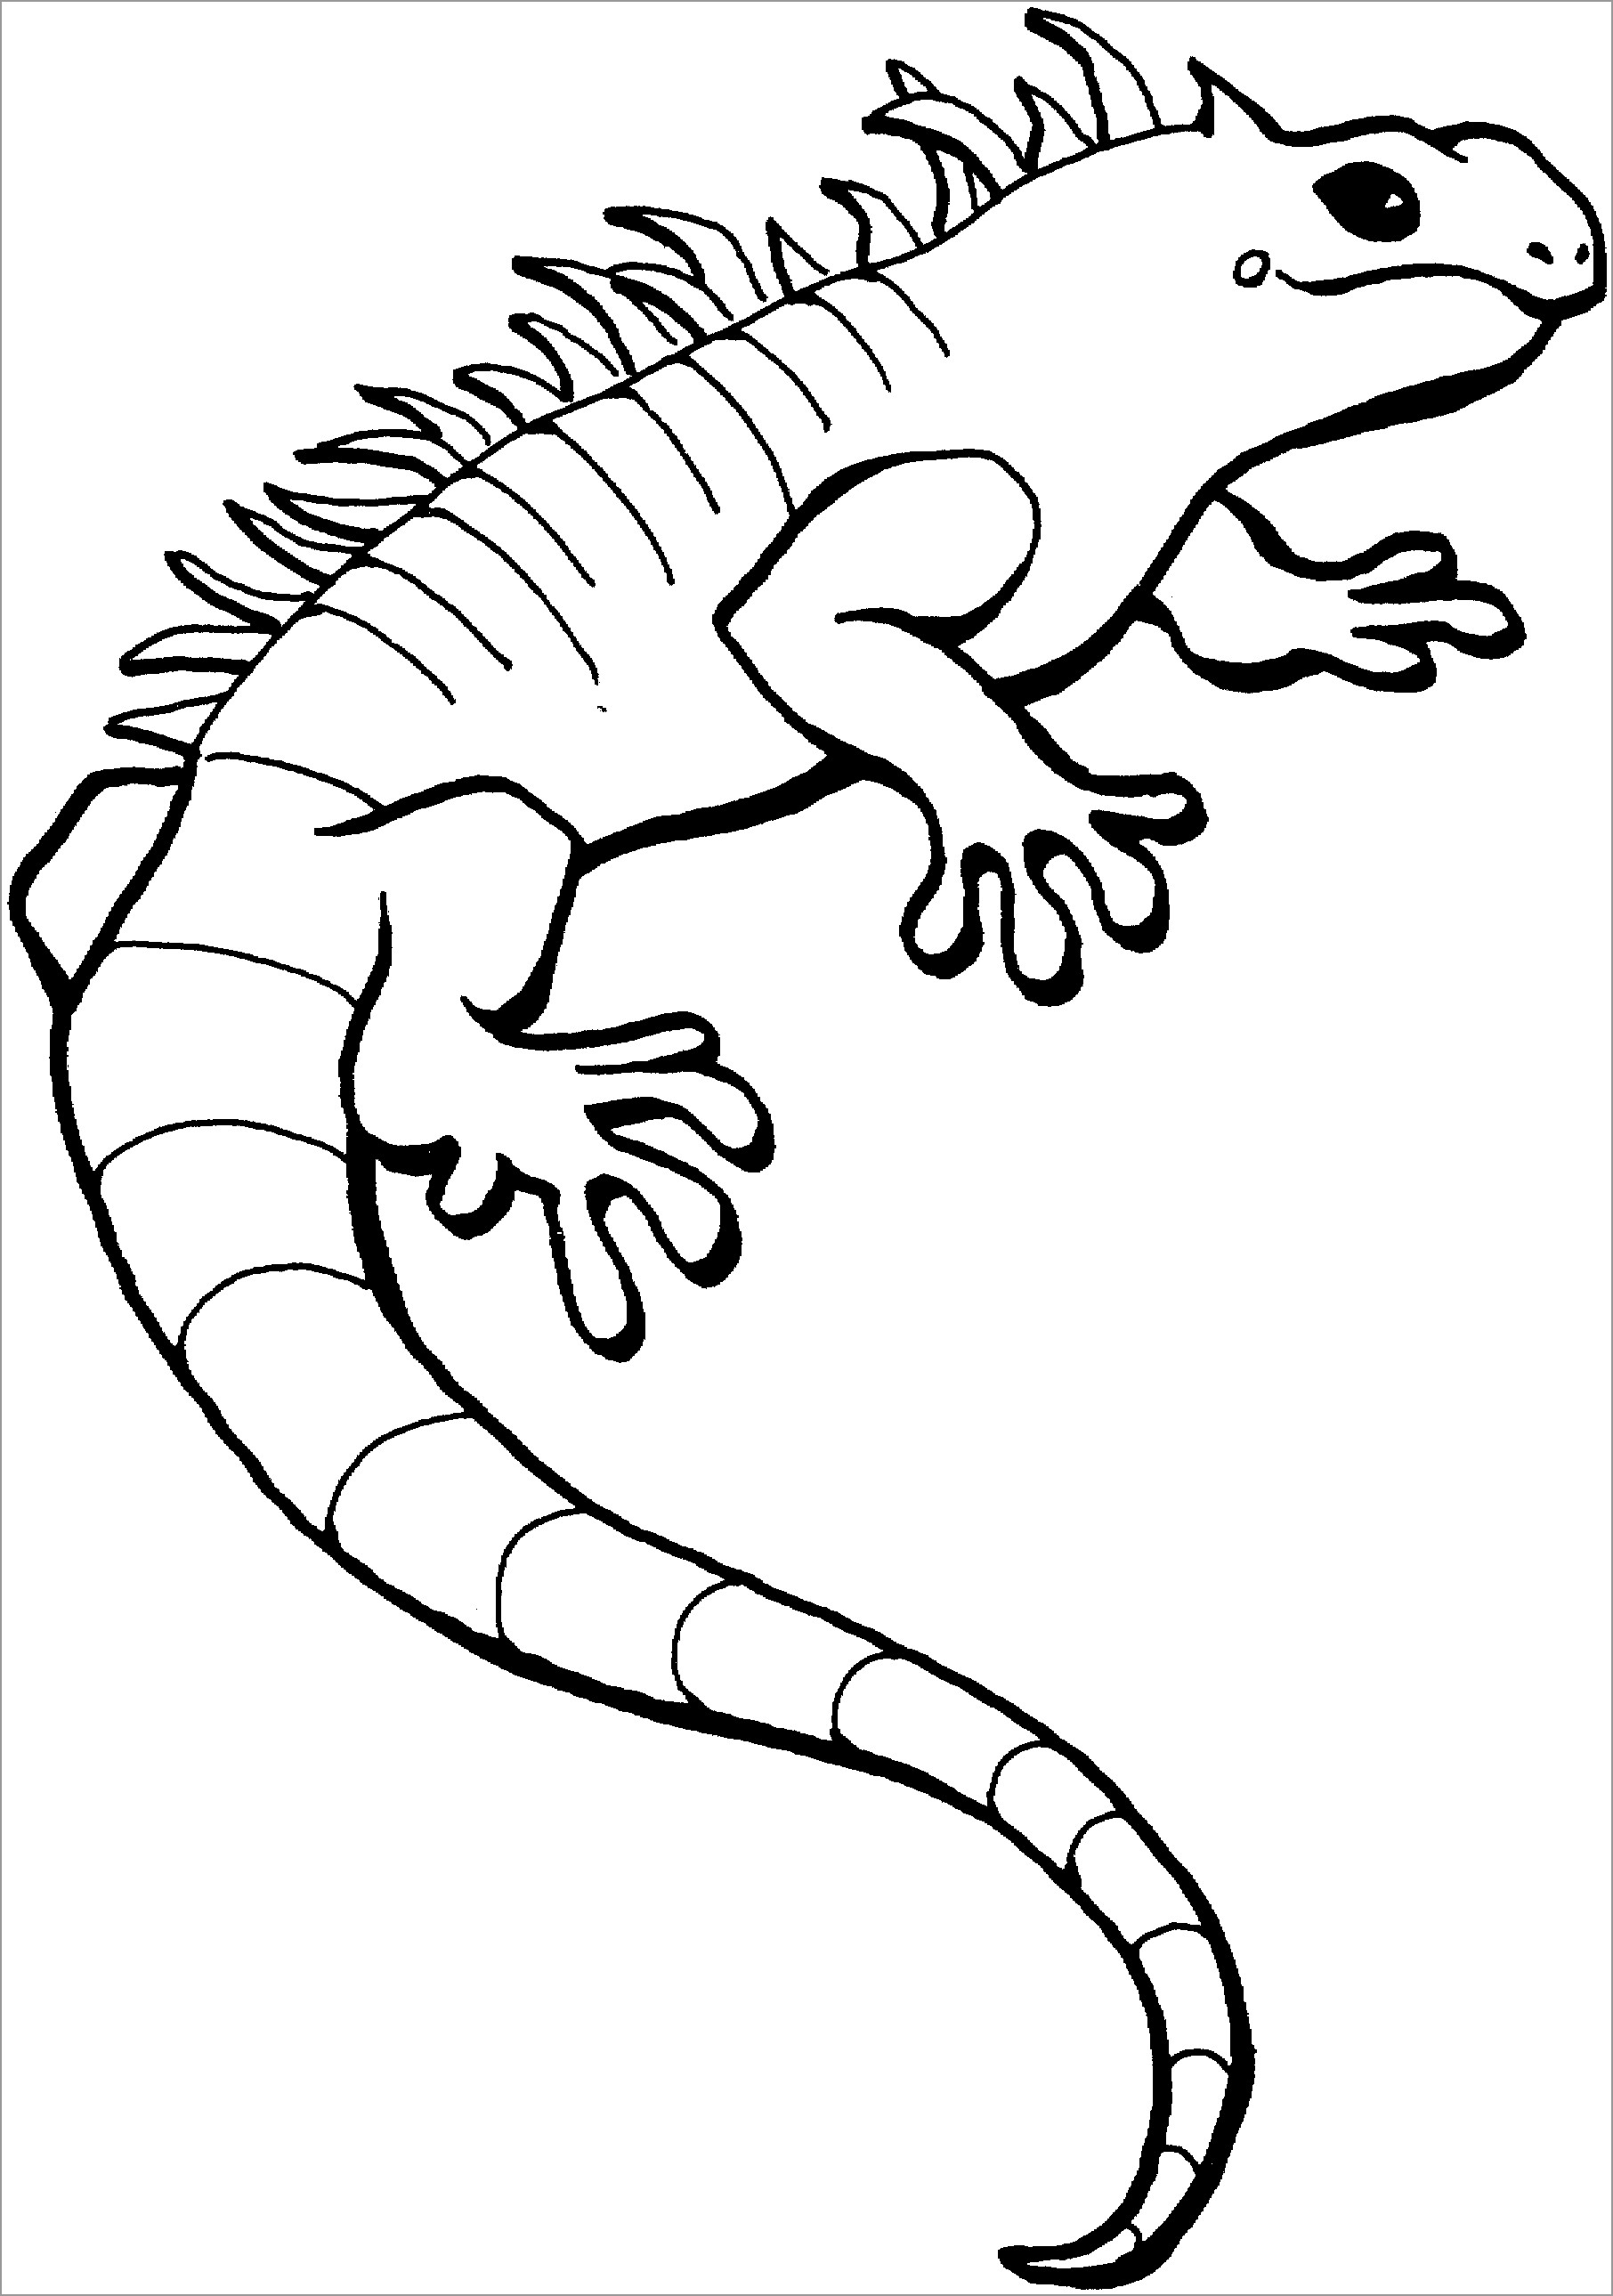 Coloring Page Of Lizards